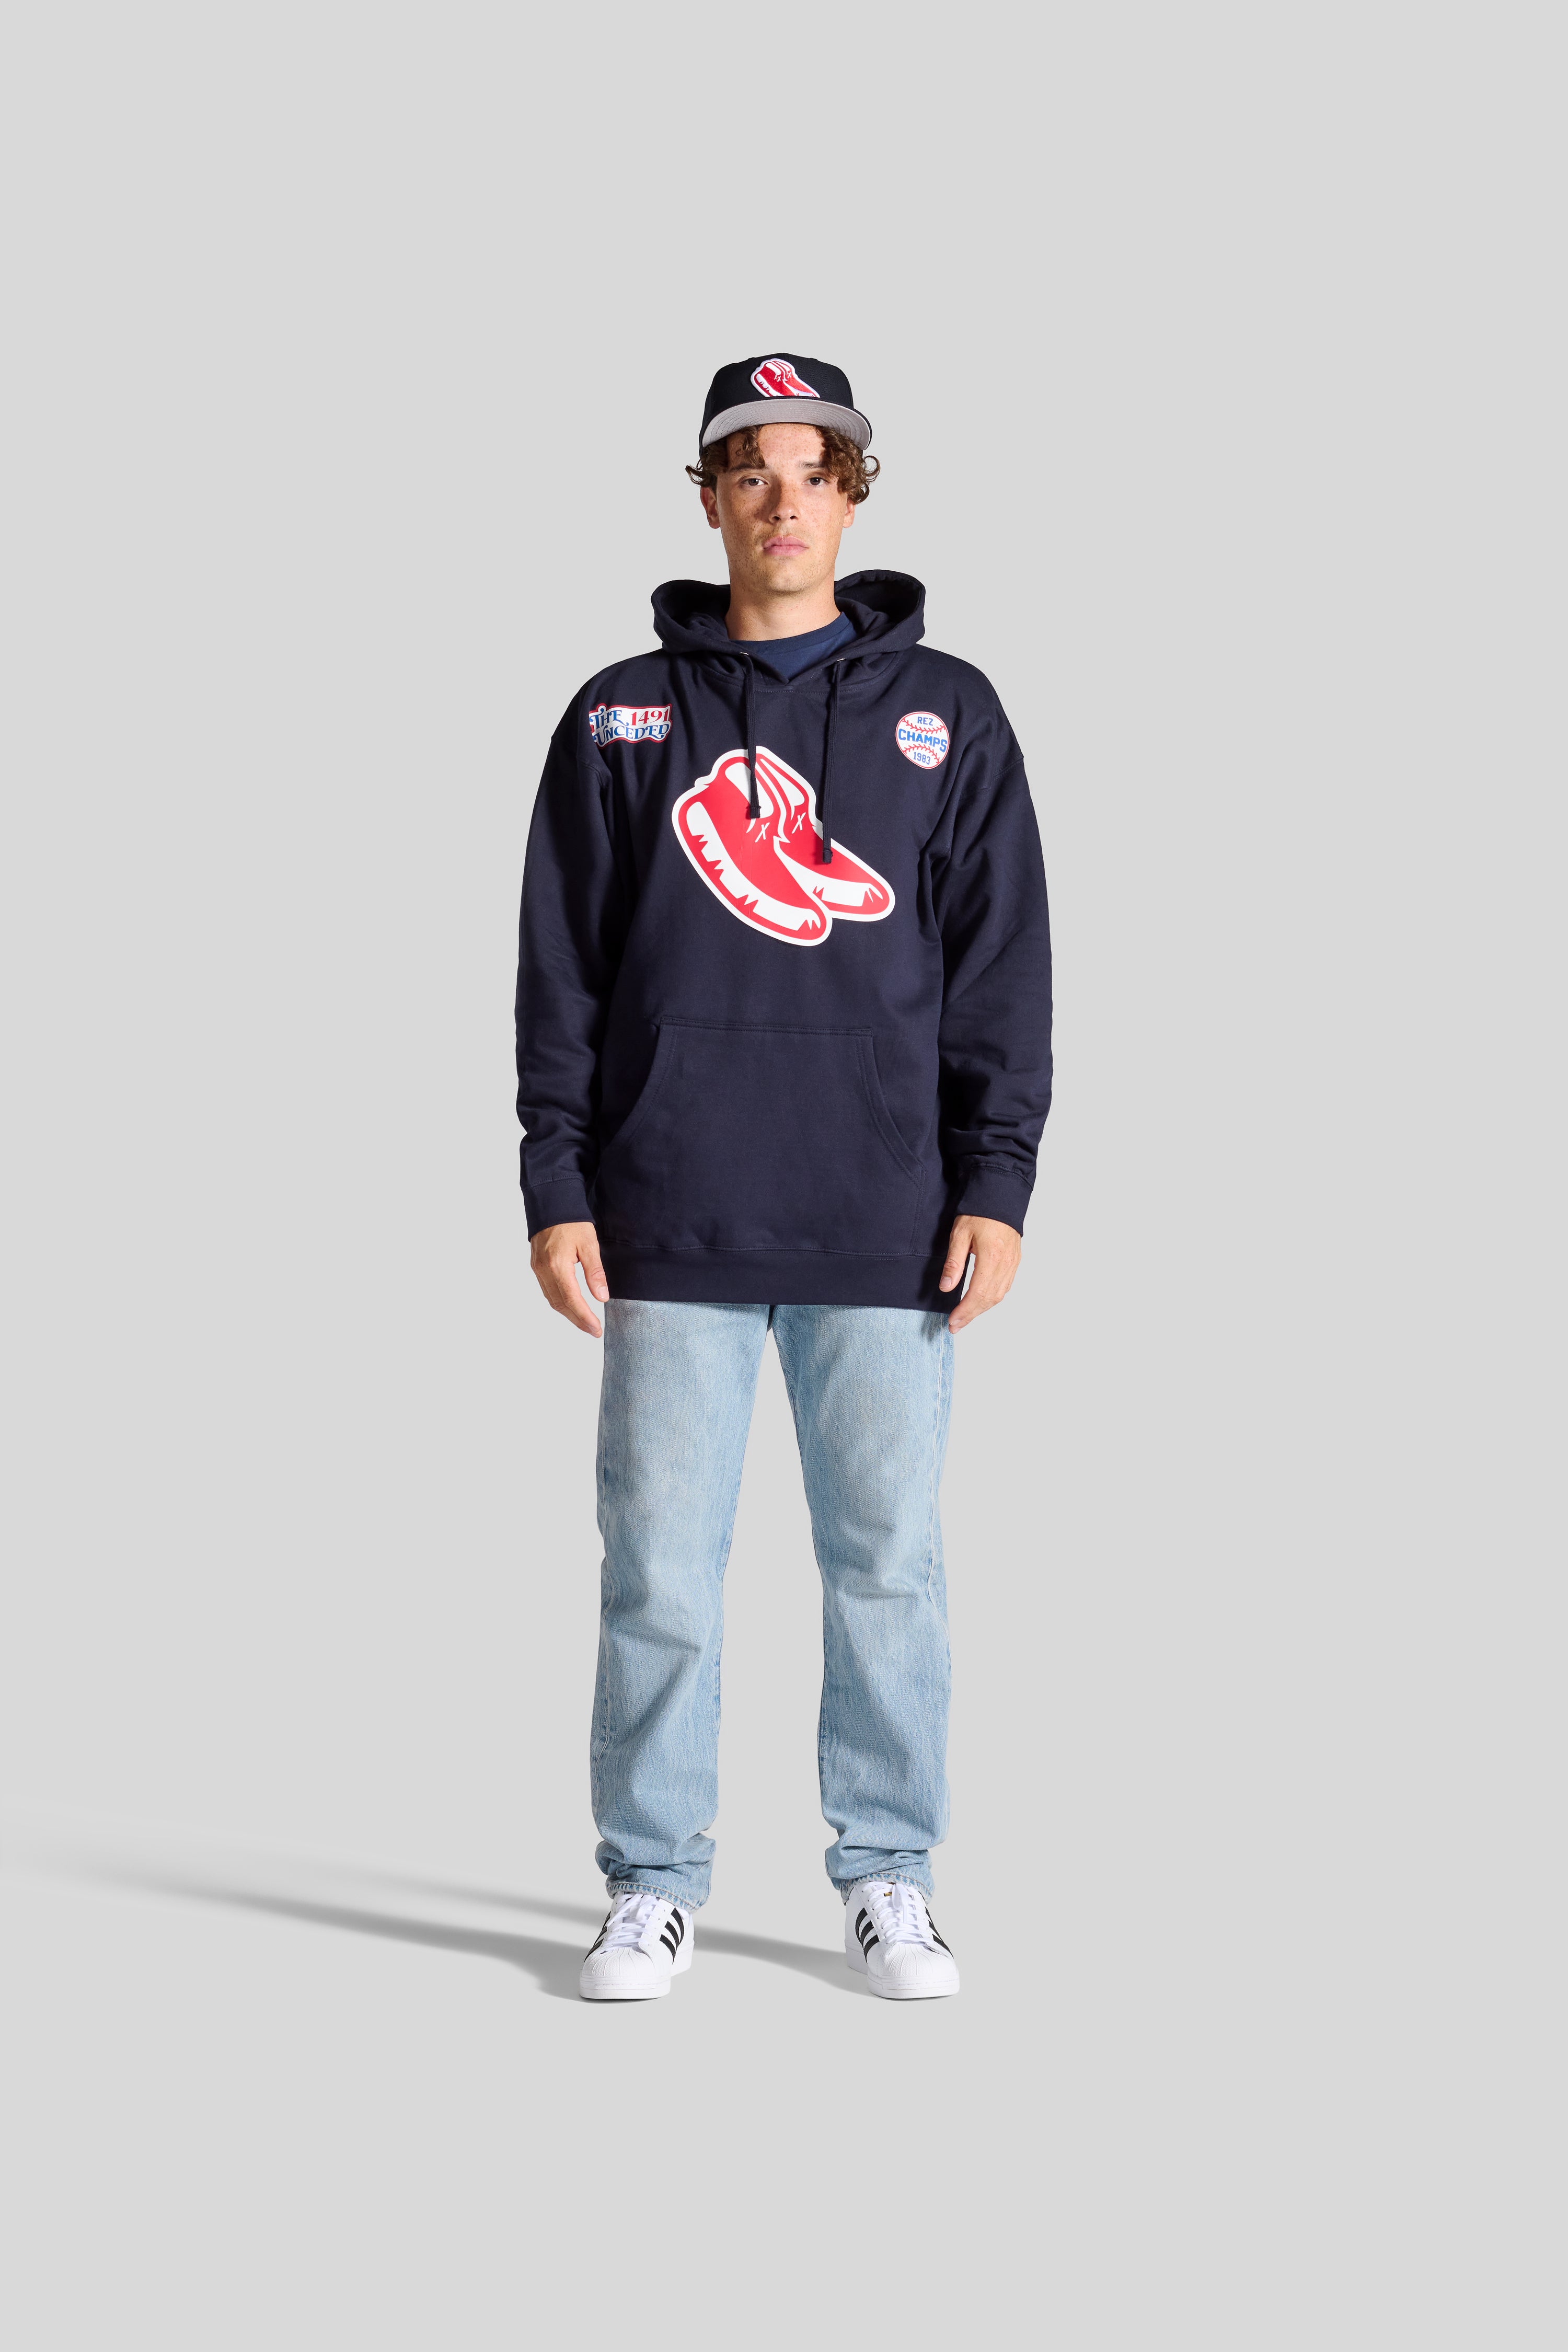 Red Mox Forever Hoodie - Navy